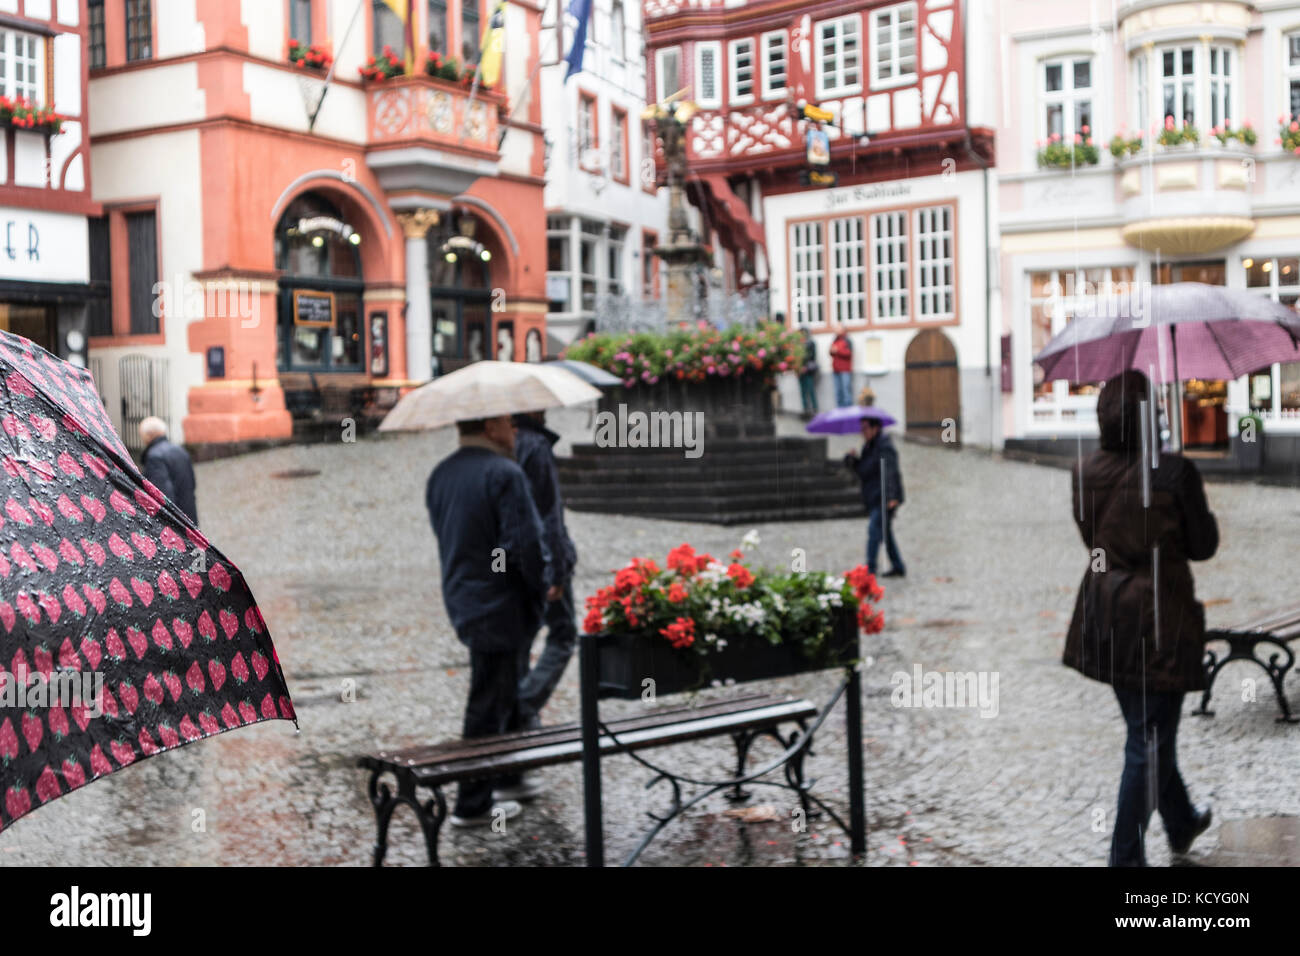 A wet, rainy day at the town of Bernkastel-Kues, in the Mosel Valley, Germany. The tourists have umbrellas. The main focus point is the pink umbrella Stock Photo